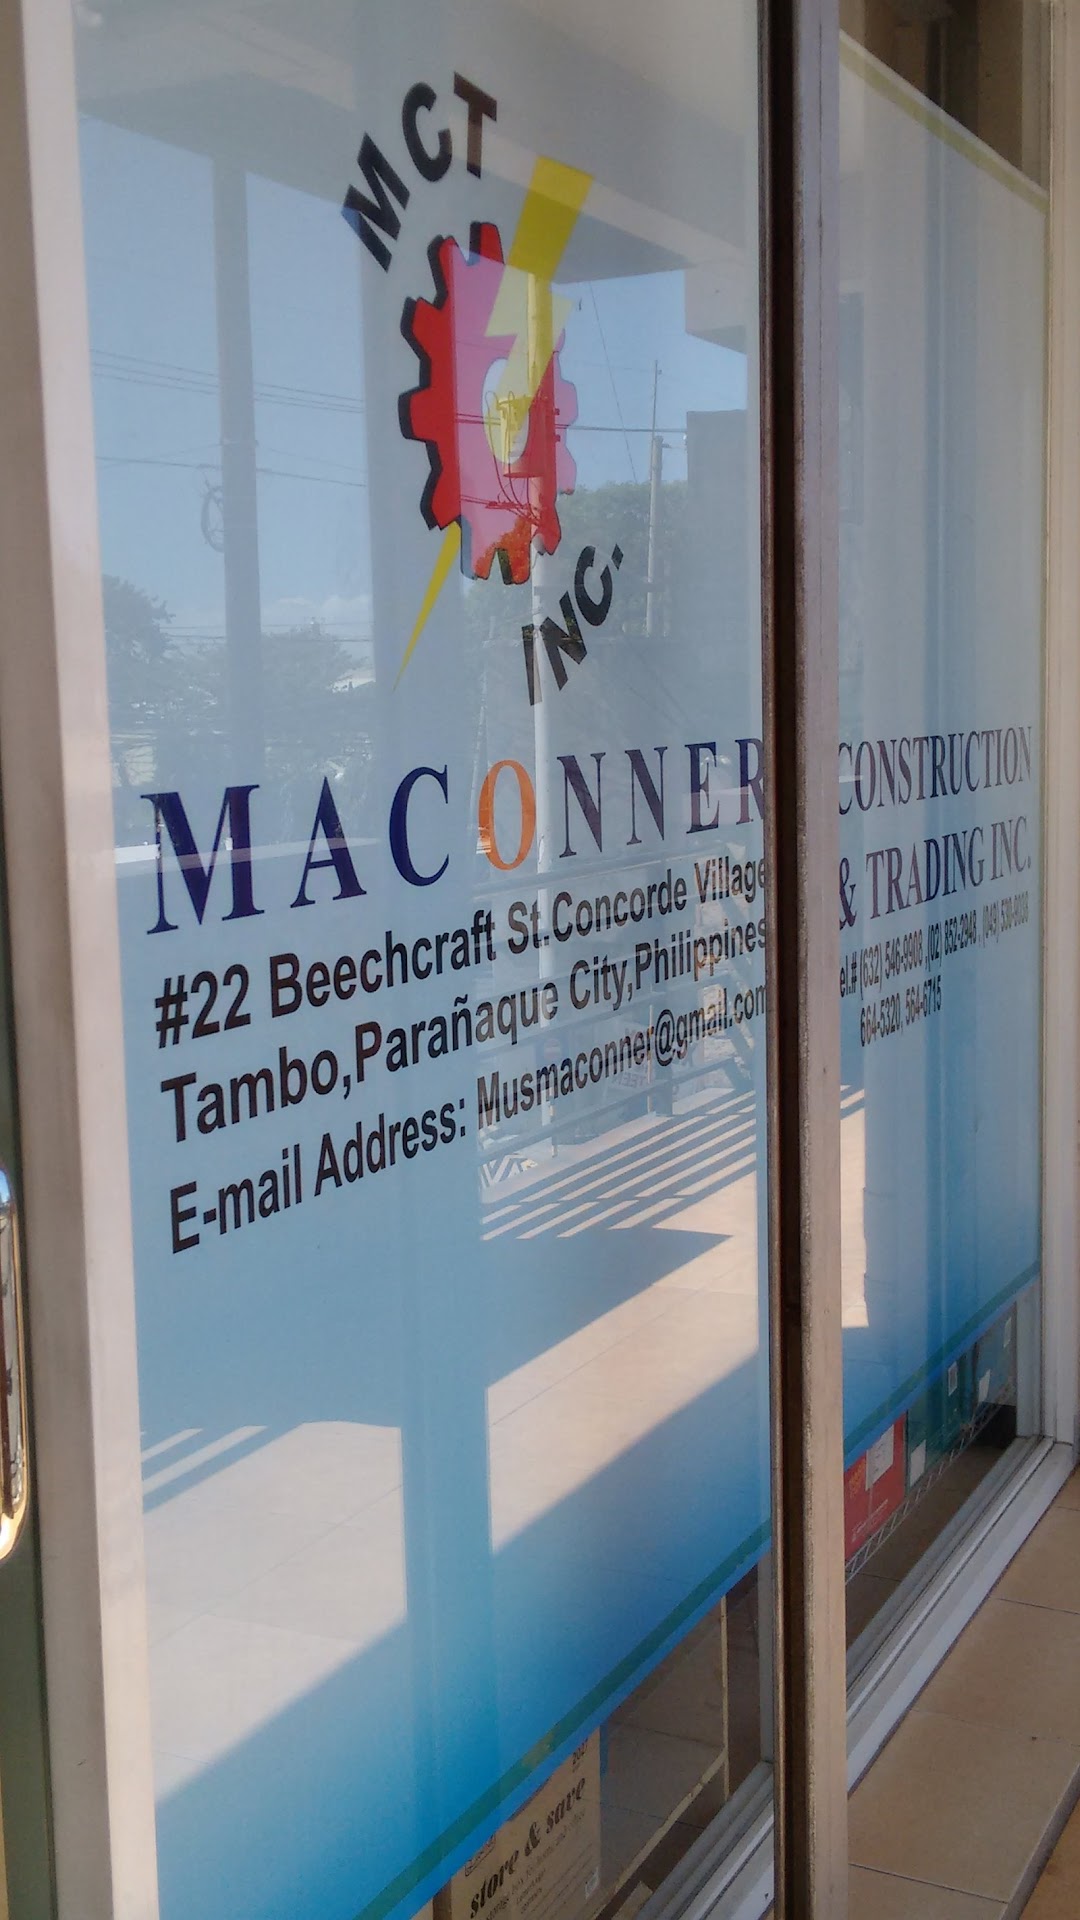 Maconner Construction And Trading Incorporated